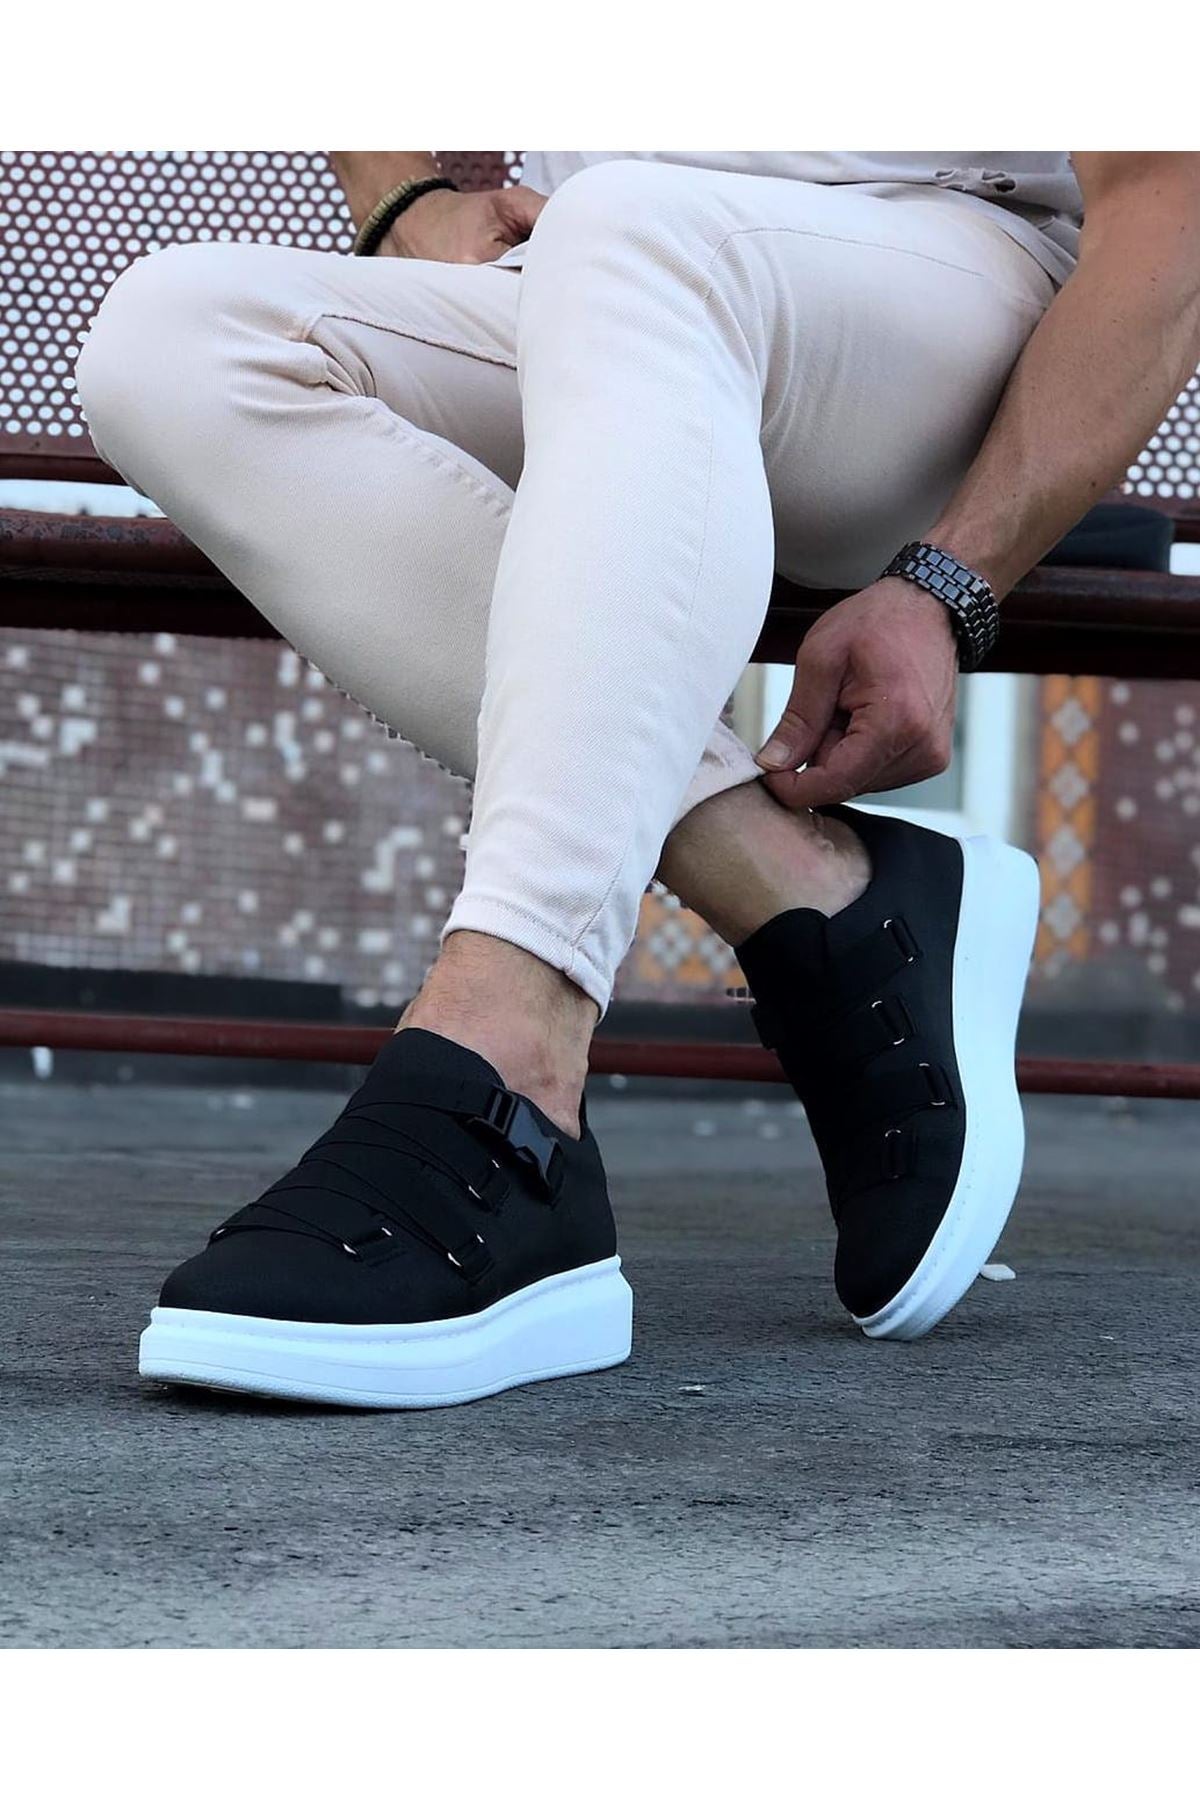 WG033  Black Men's High-Sole Shoes sneakers - STREETMODE™